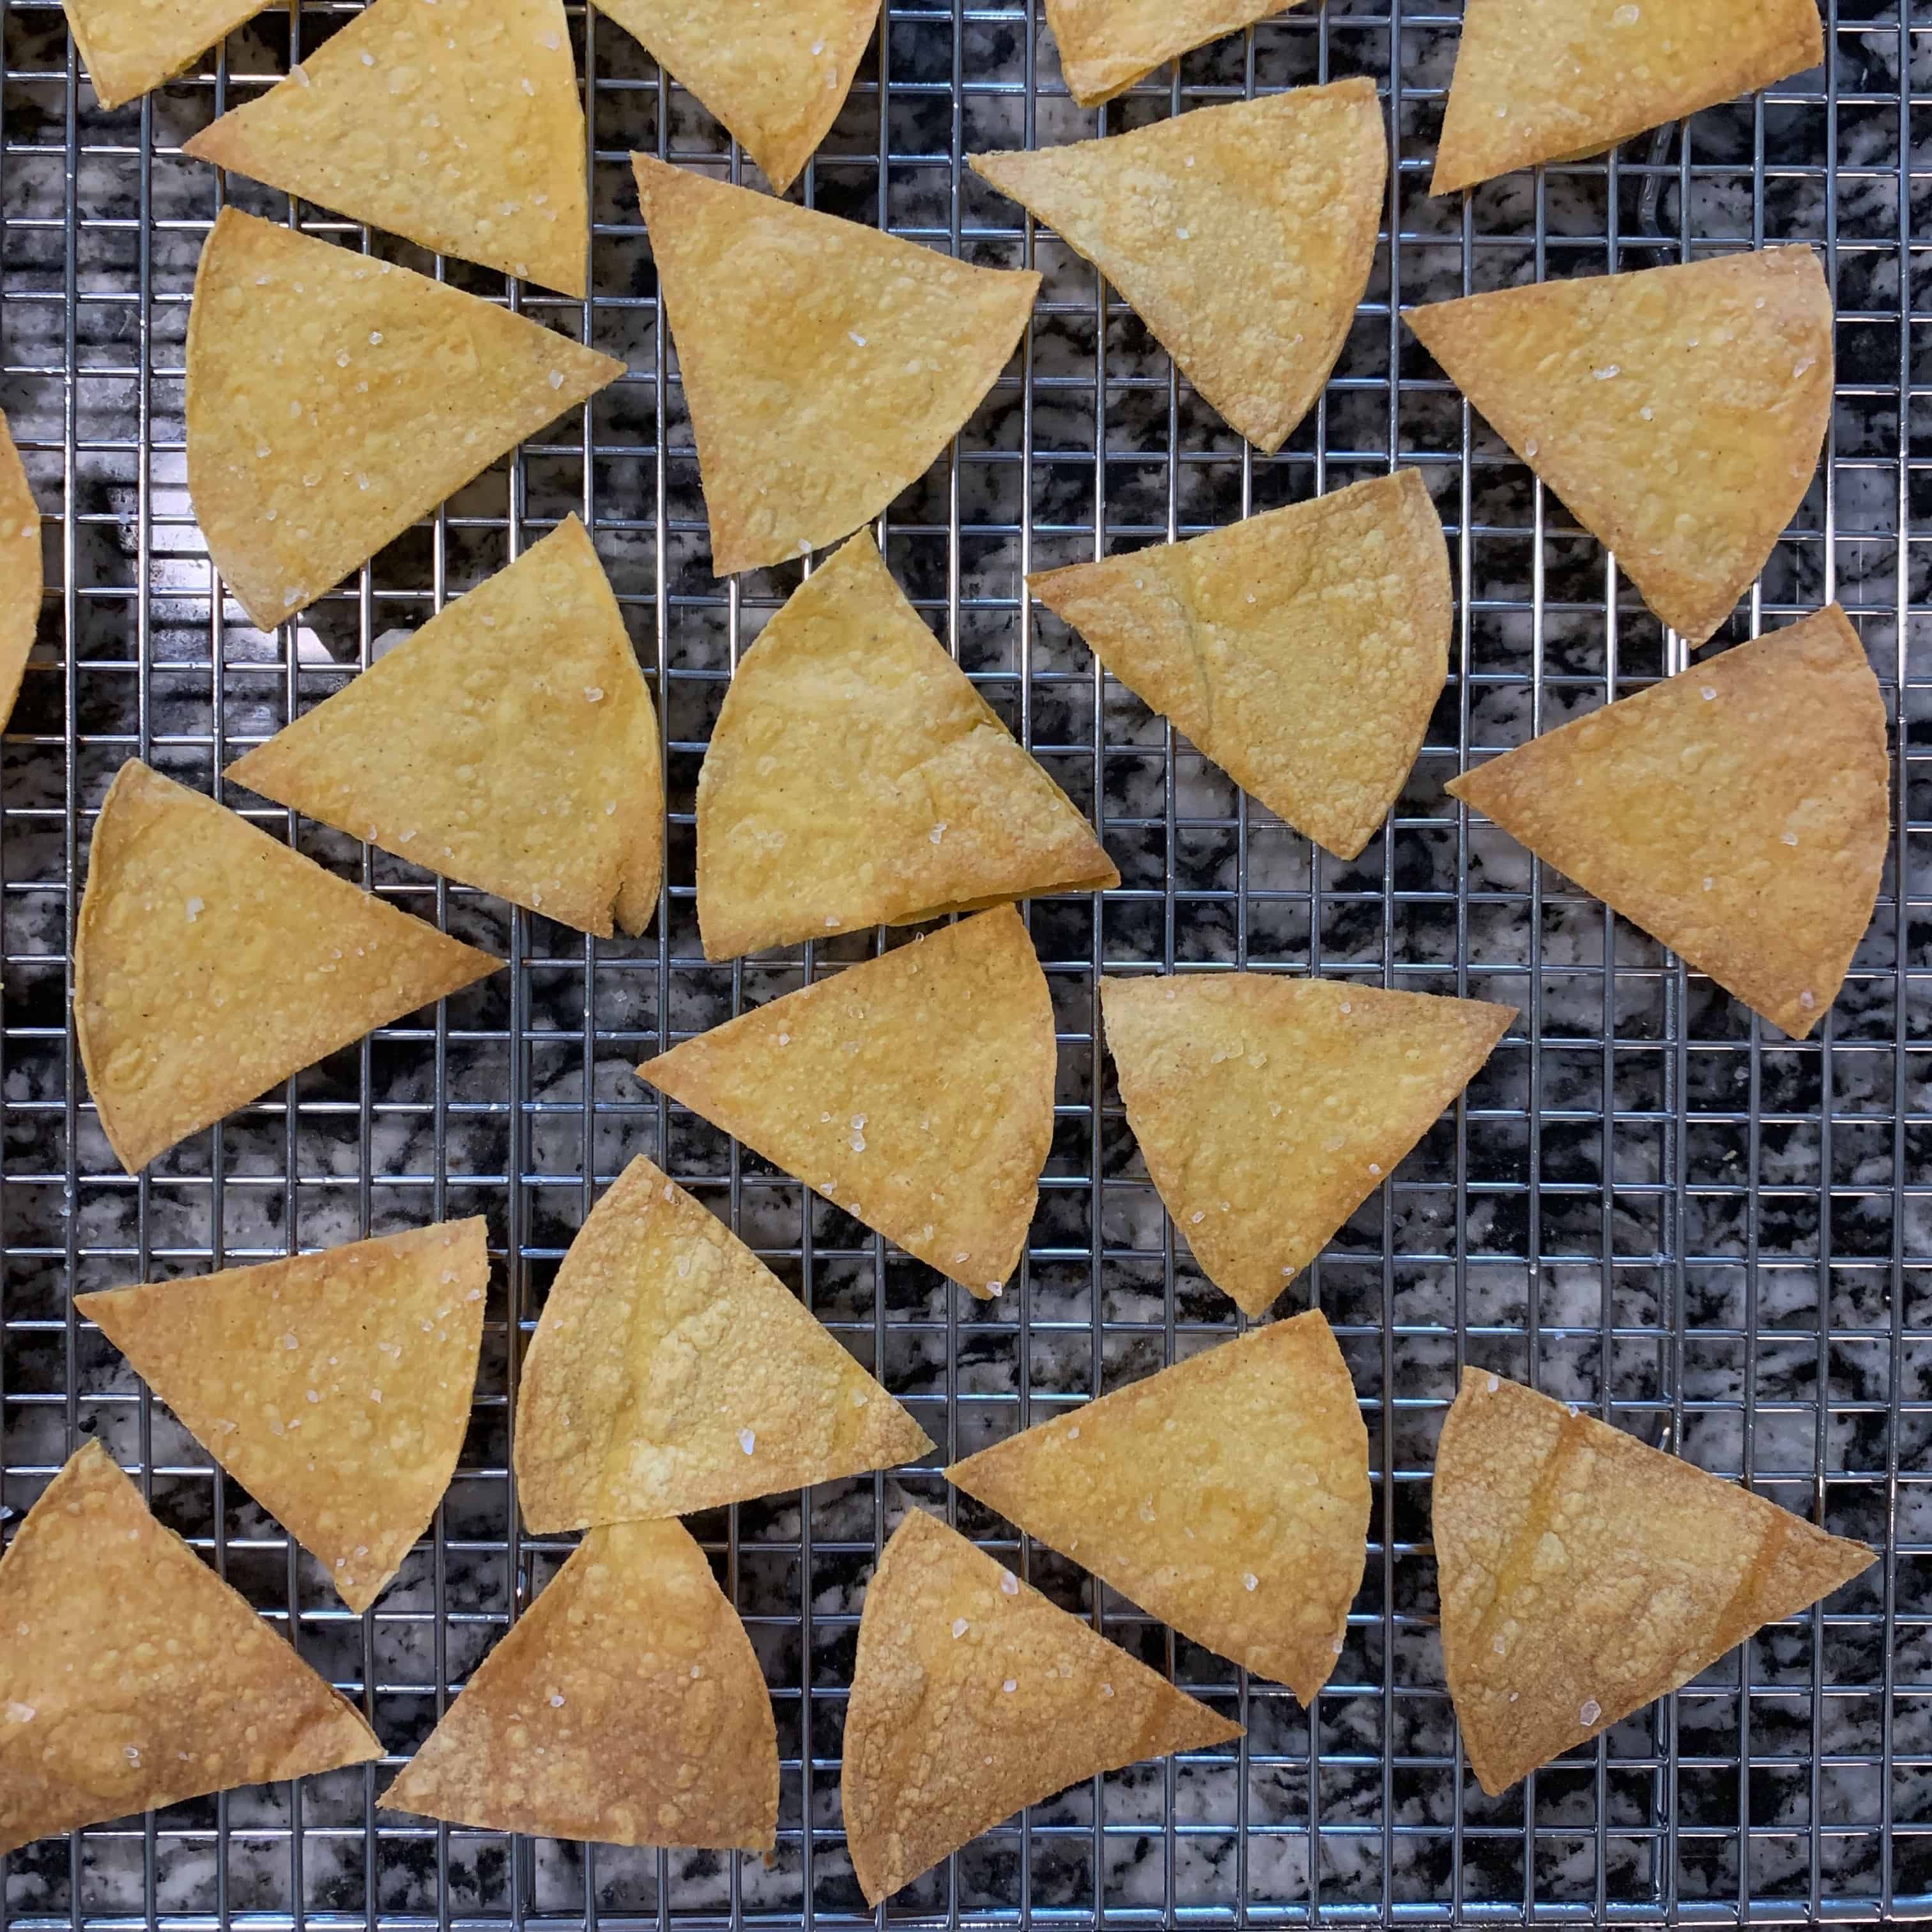 baked tortilla chips on a wire rack